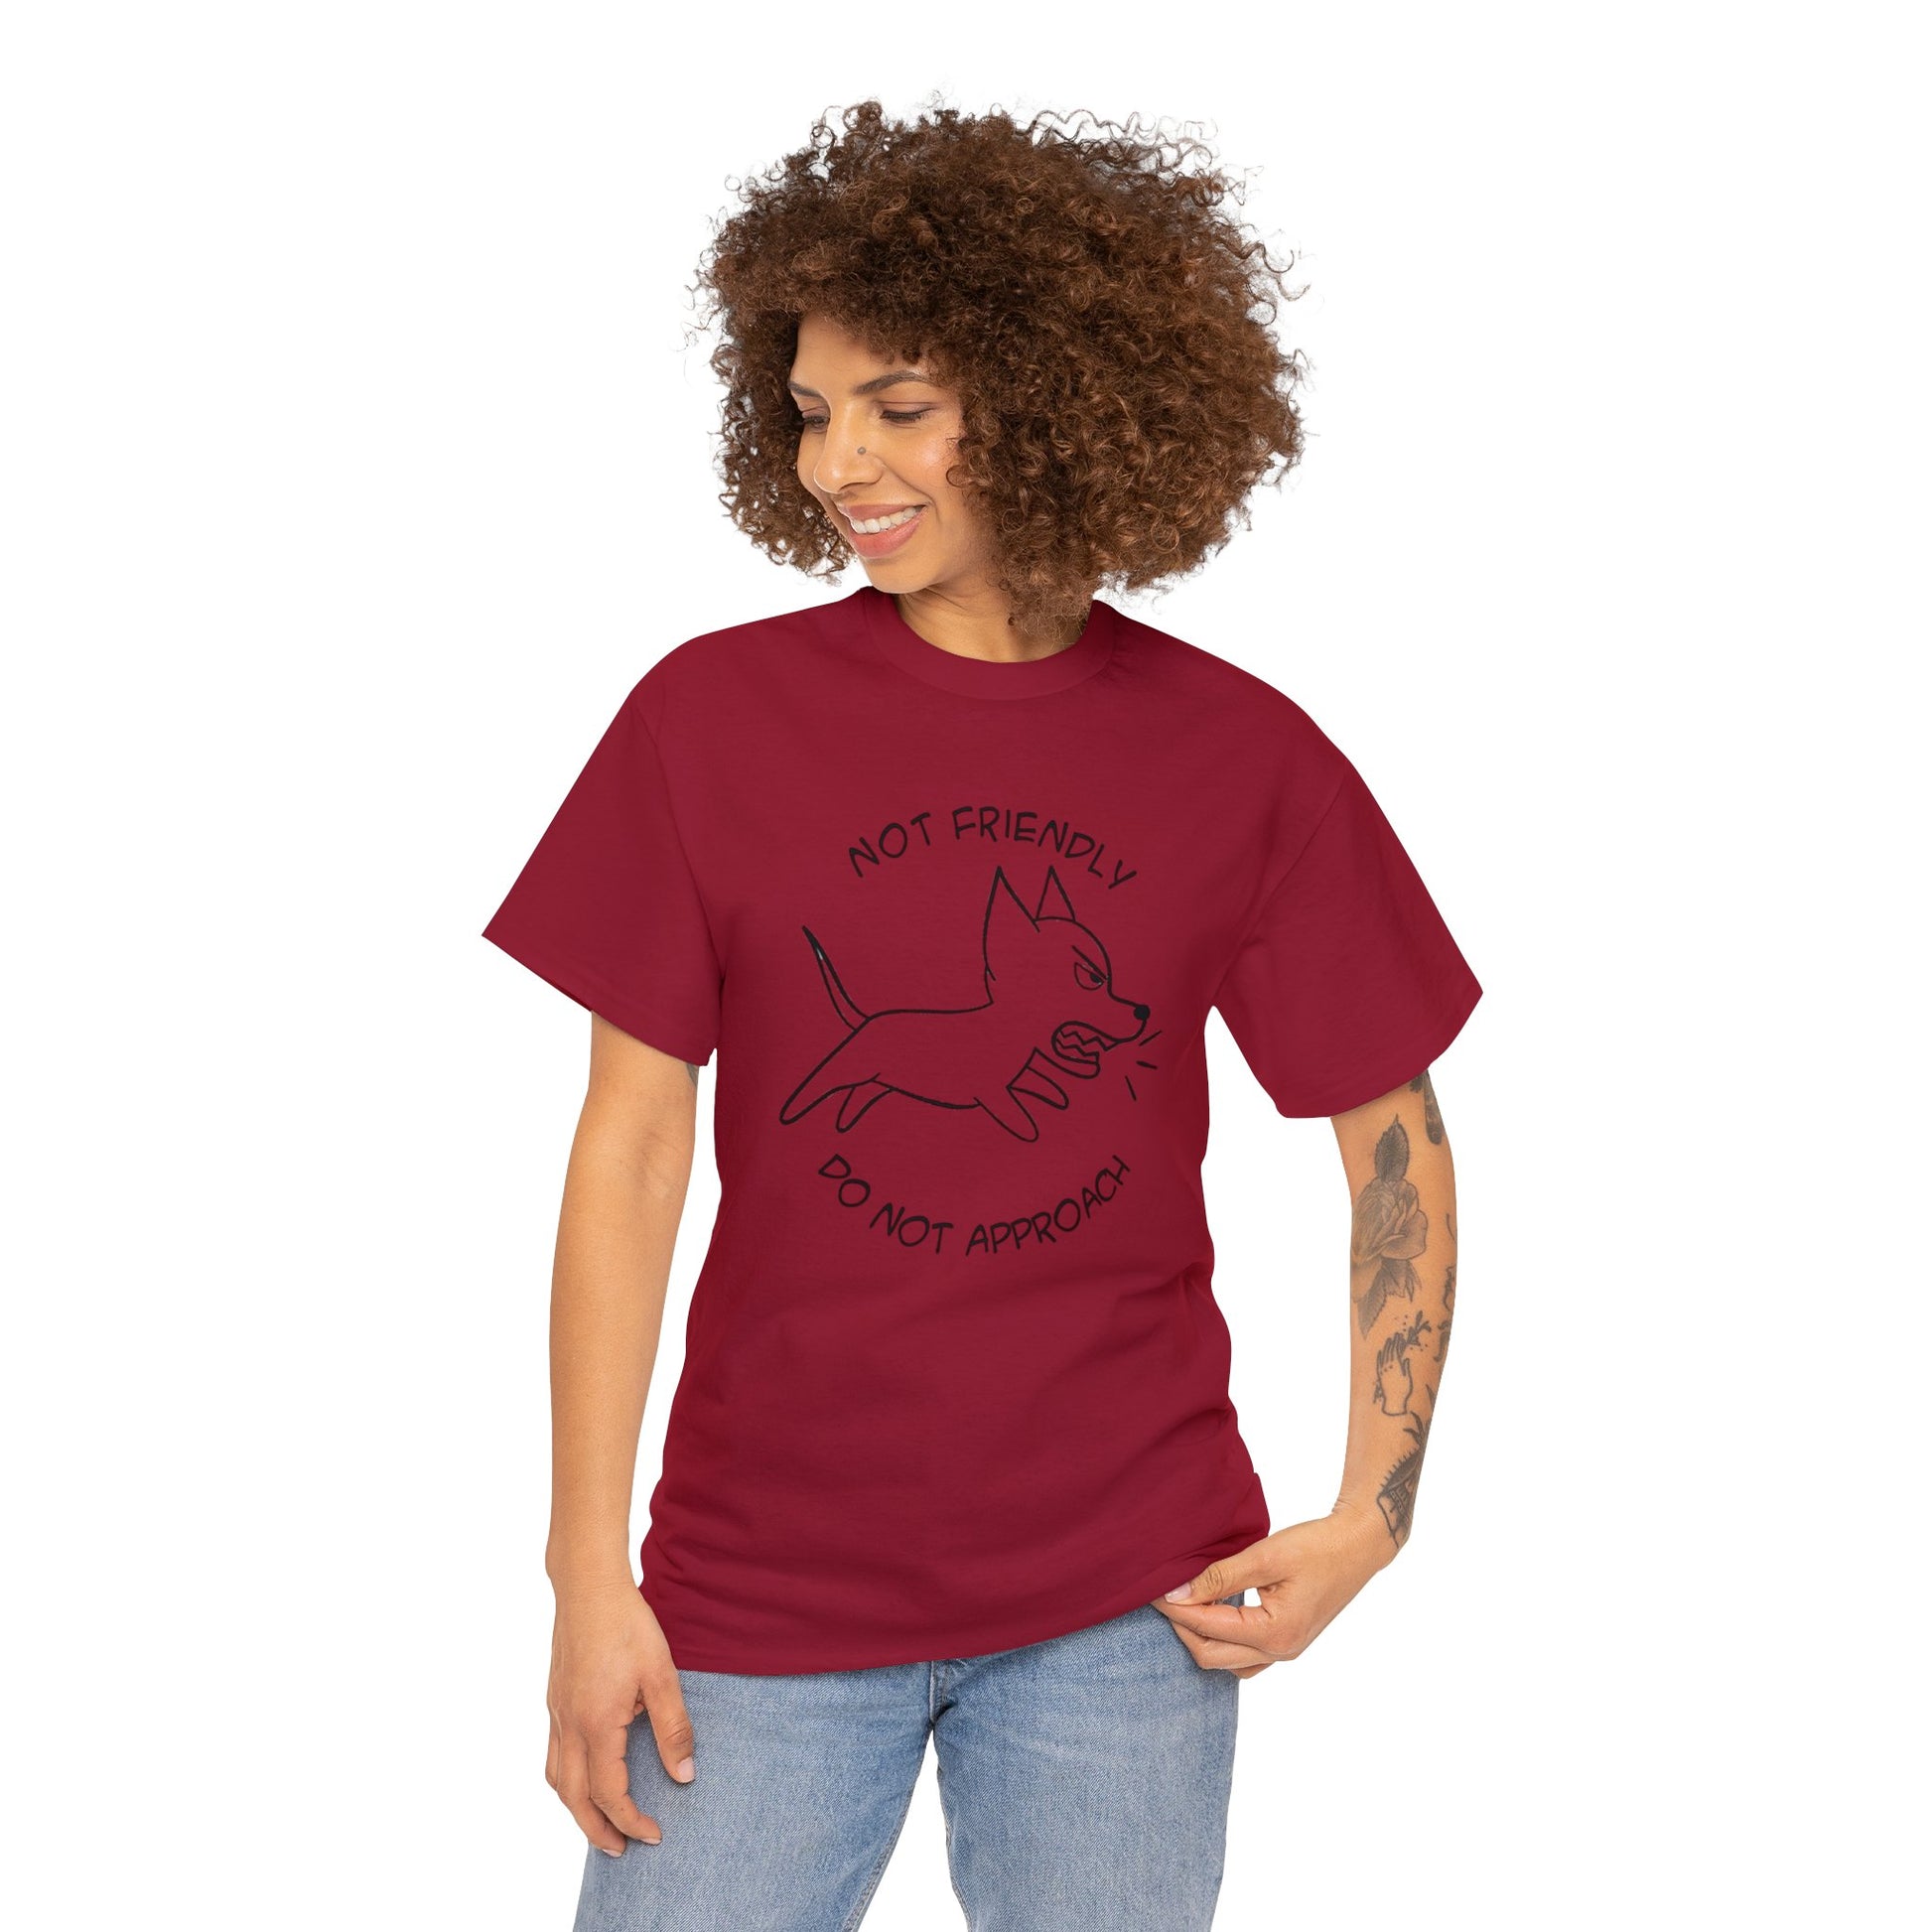 "Do Not Approach" T-Shirt - Weave Got Gifts - Unique Gifts You Won’t Find Anywhere Else!